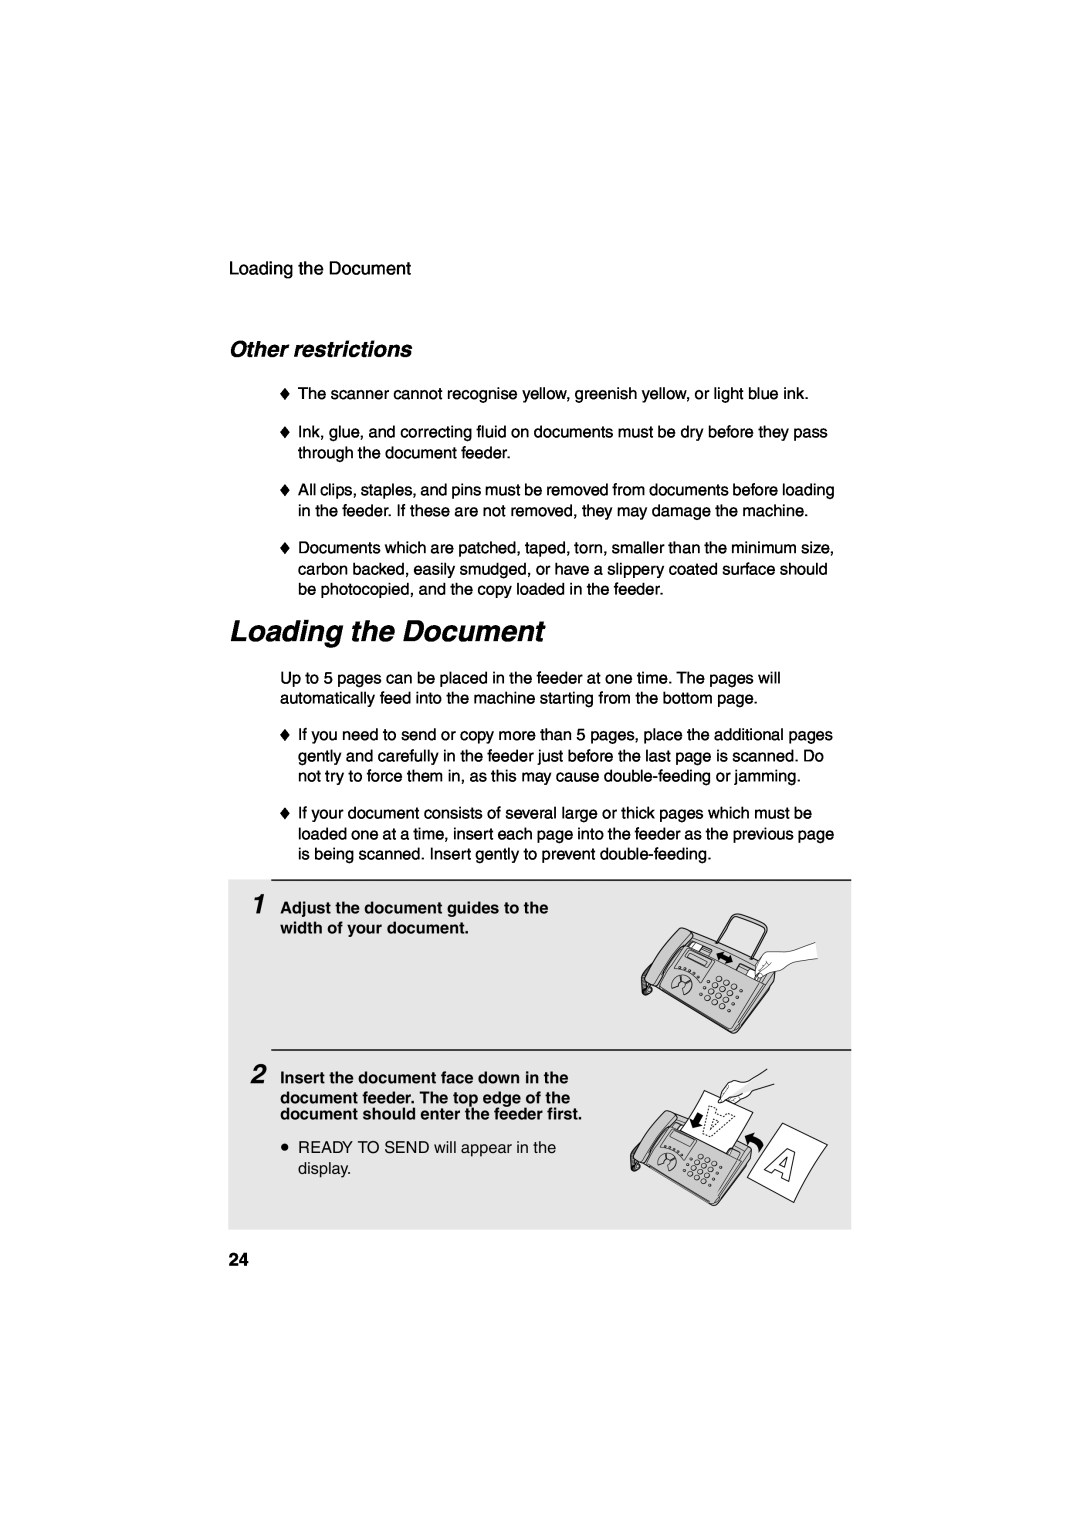 Sharp GQ-56, UX-41 Loading the Document, Other restrictions, Adjust the document guides to the width of your document 